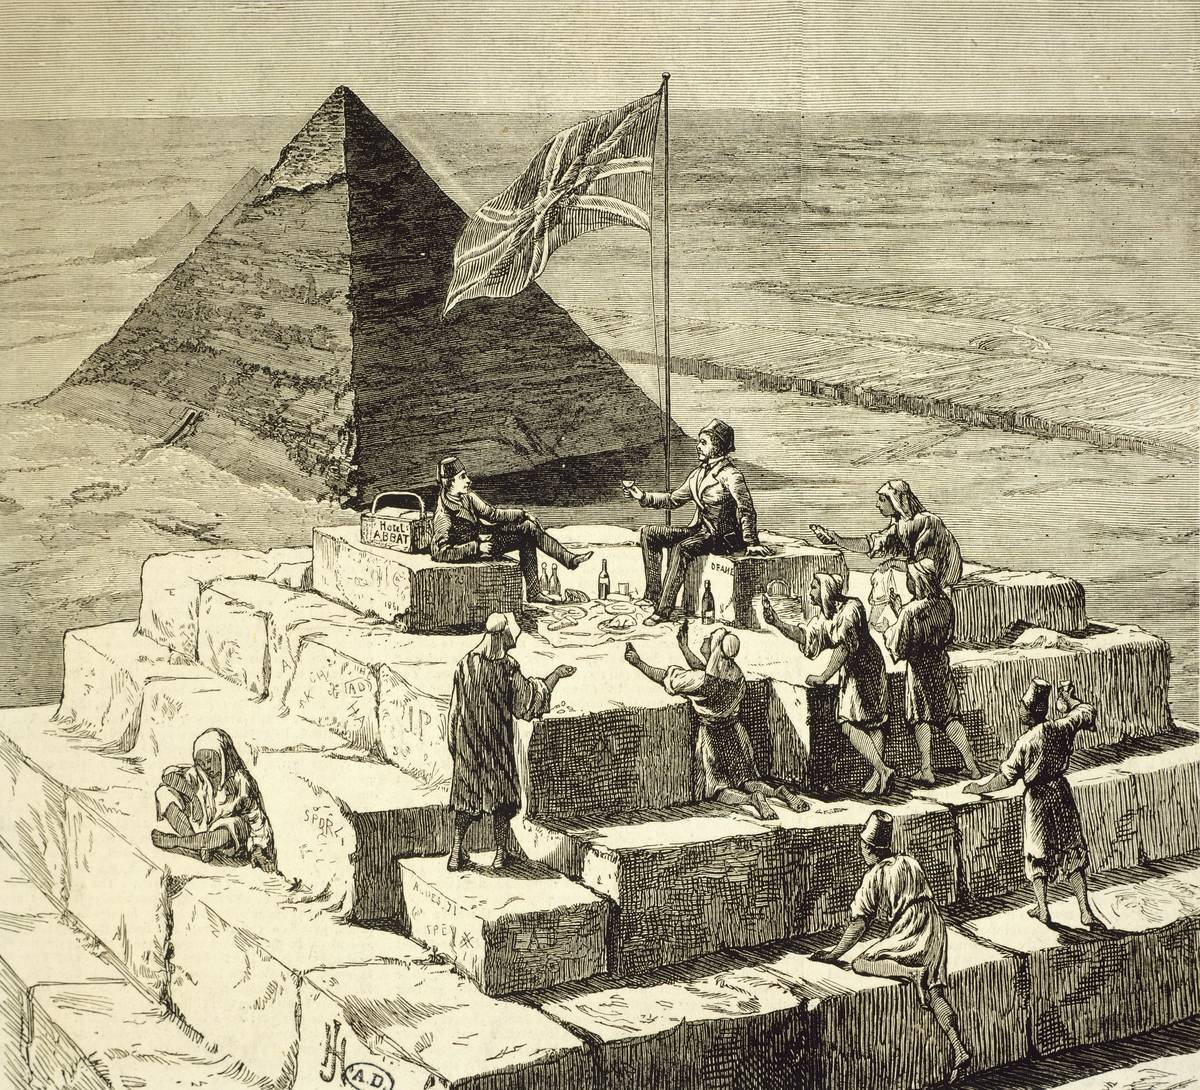 <p>Despite the belief that the Egyptians created the pyramids with wood and ropes, scientists haven't been able to recreate exactly how the pyramids were made. According to what we know about history, the Egyptians simply didn't have tools that could create something so large and precise. In fact, scientists attempted to recreate the pyramids in small-scale models but failed every time.</p> <p>The truth is that the Great Pyramid was made from 2.3 million stone blocks that each weight 2.5 to 15 tons. No type of wood could withstand the weight of the stones, and the workers would have had to lay down a block every 2.5 minutes for the Pyramid to have been built in 20 years as originally thought. For this reason, some scientists believe that the Pyramids actually predate the Egyptians and were created by a much more advanced society.</p>